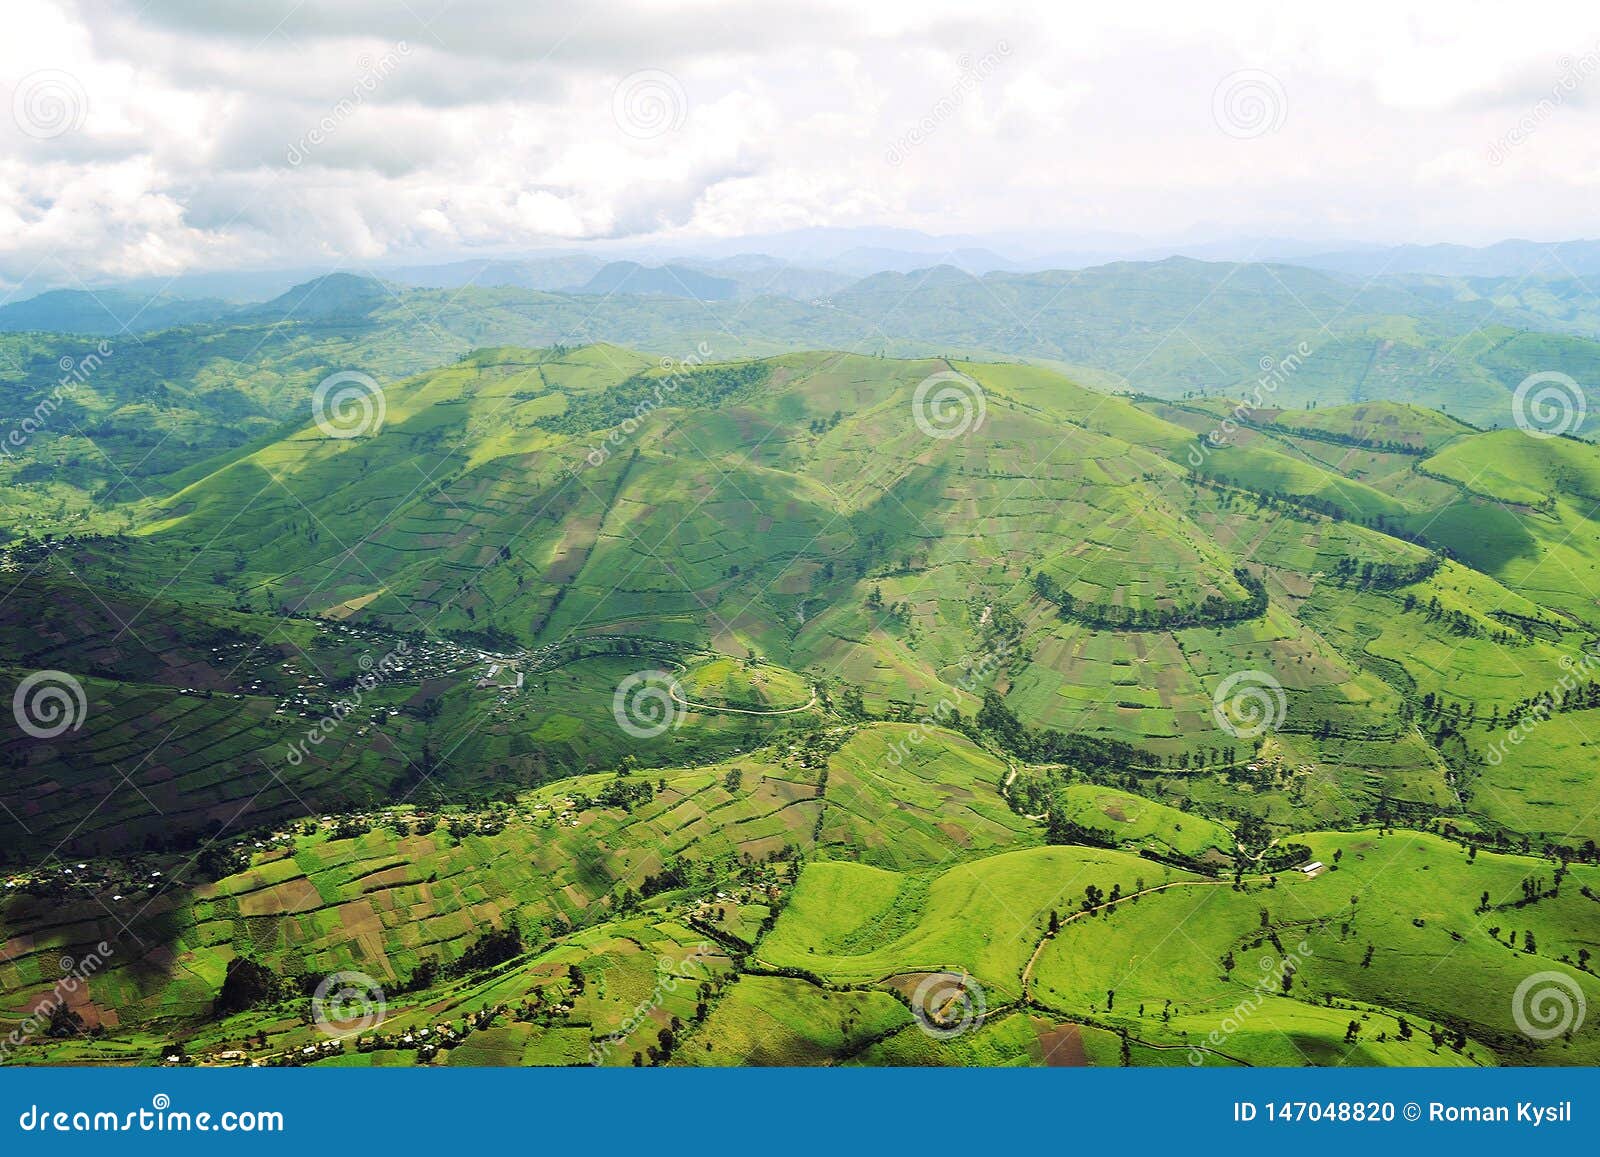 the territory of the democratic republic of the congo from the height of the bird`s eye